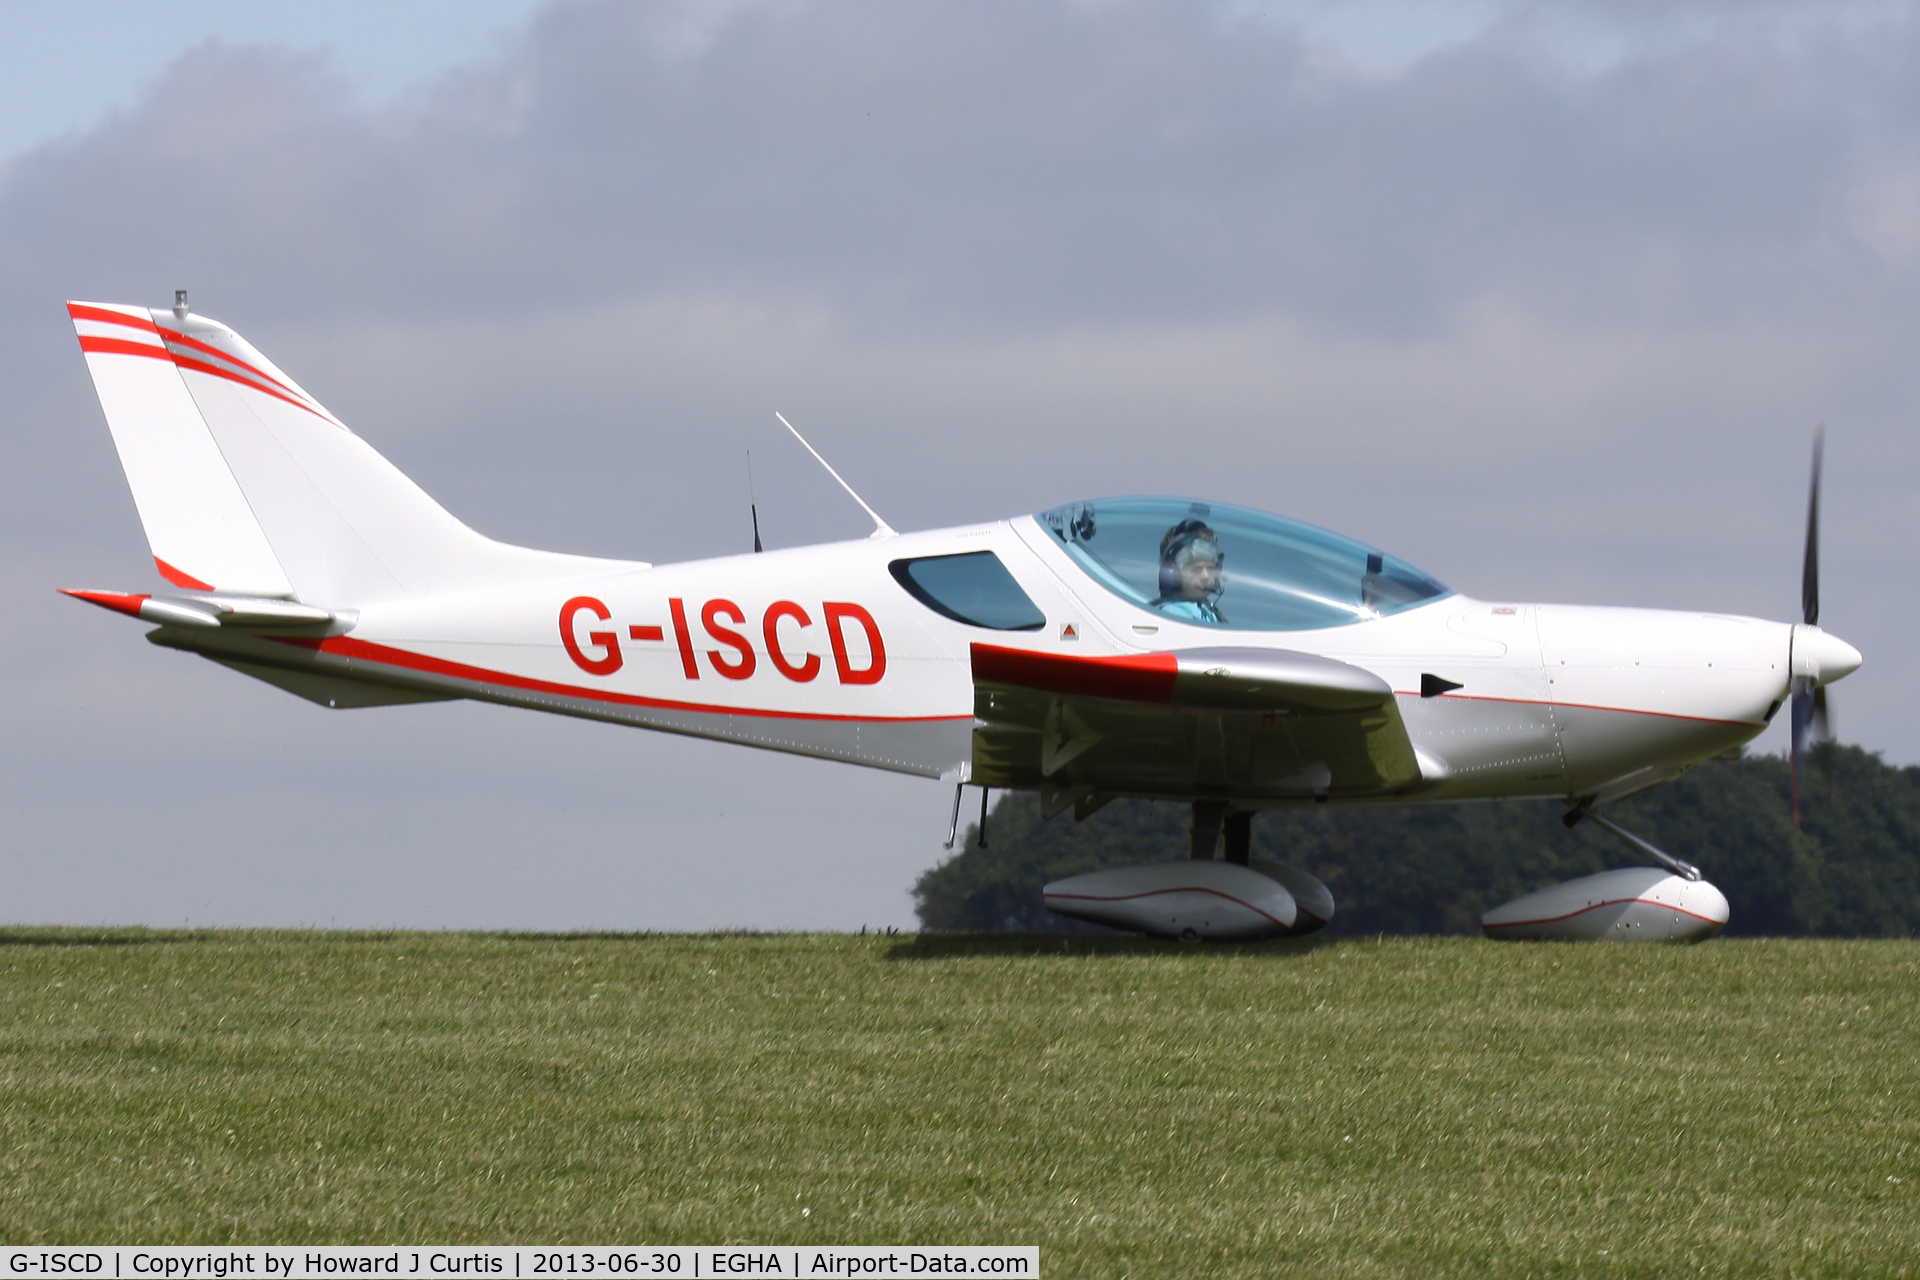 G-ISCD, 2010 CZAW SportCruiser C/N 10SC297, Privately owned, at the Pooley's Day Fly-In.